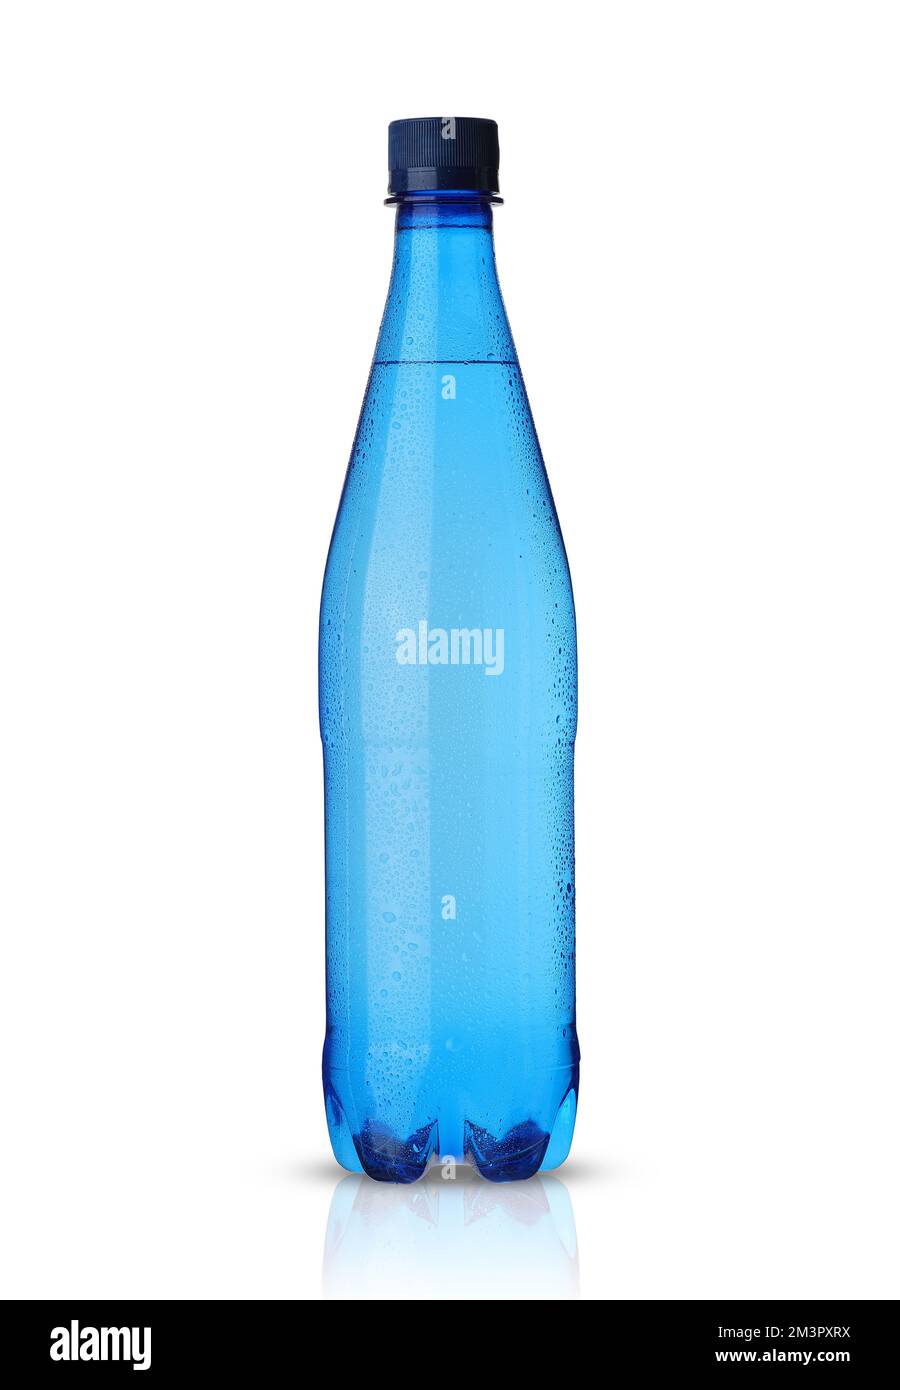 https://c8.alamy.com/comp/2M3PXRX/blue-bottle-in-drops-with-mineral-water-on-a-white-background-2M3PXRX.jpg